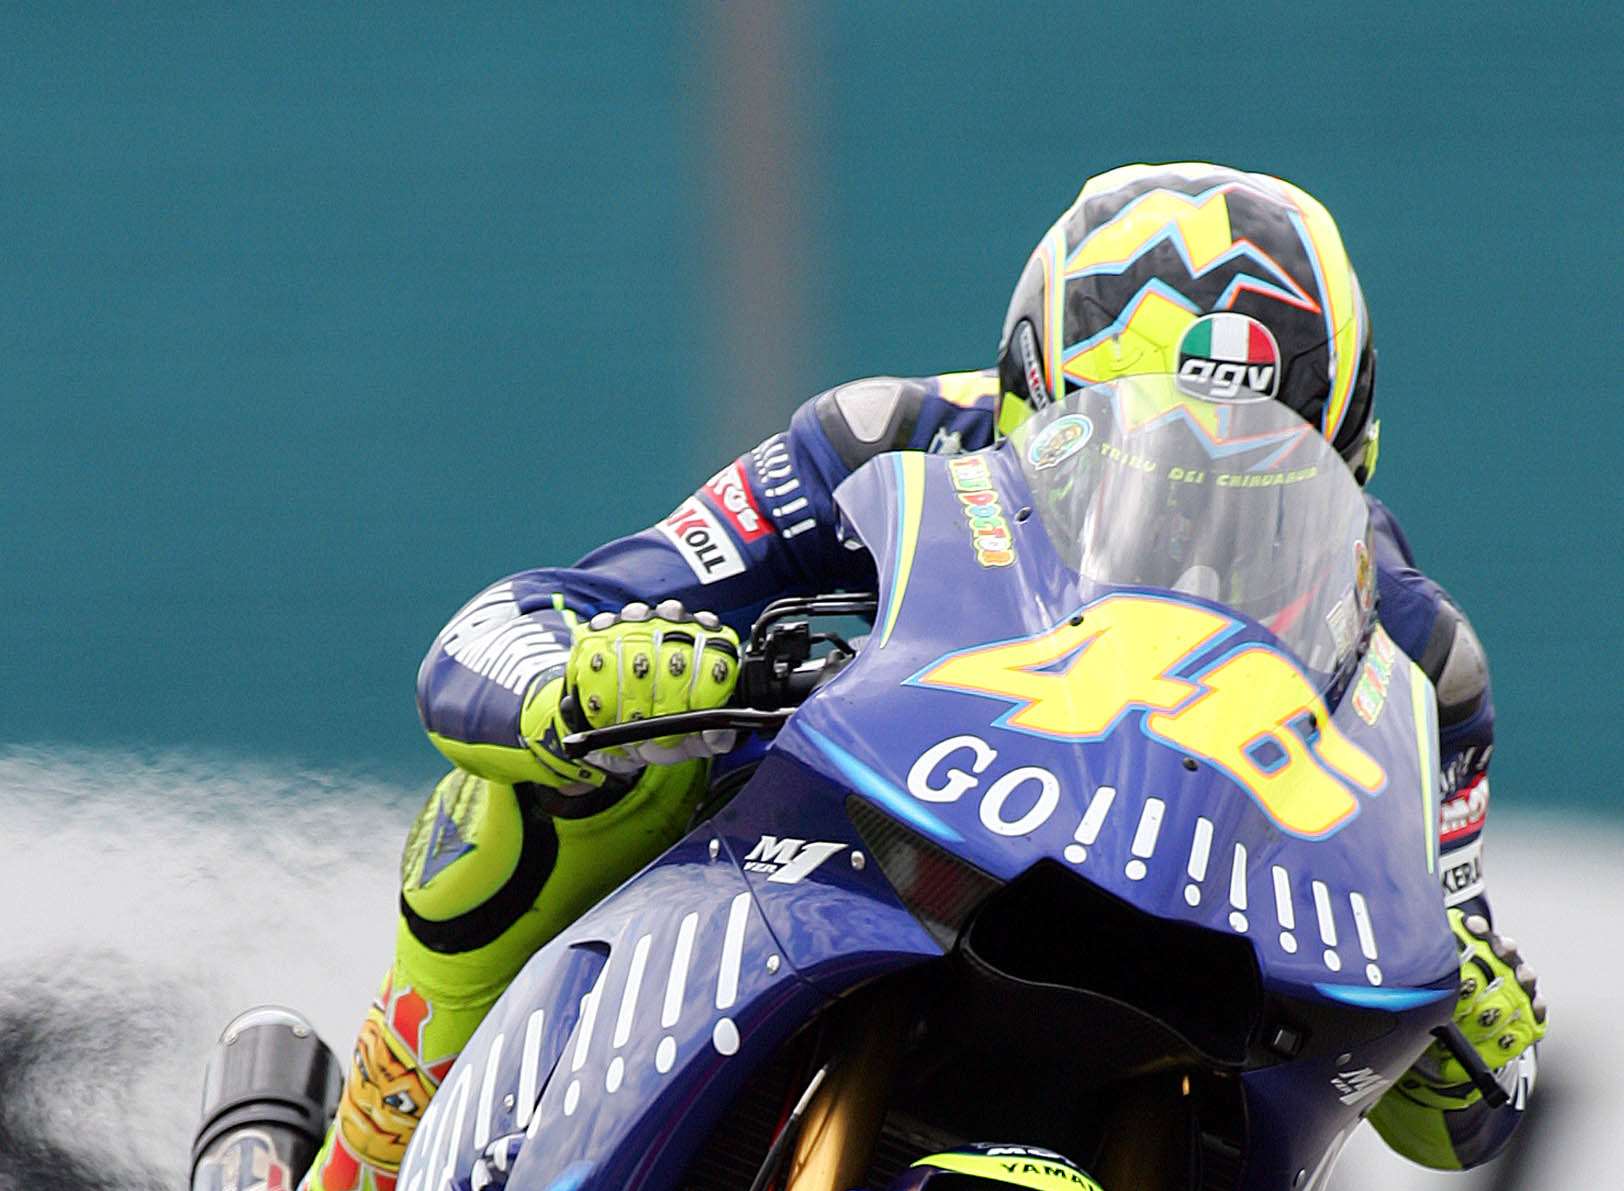 Valentino Rossi in action